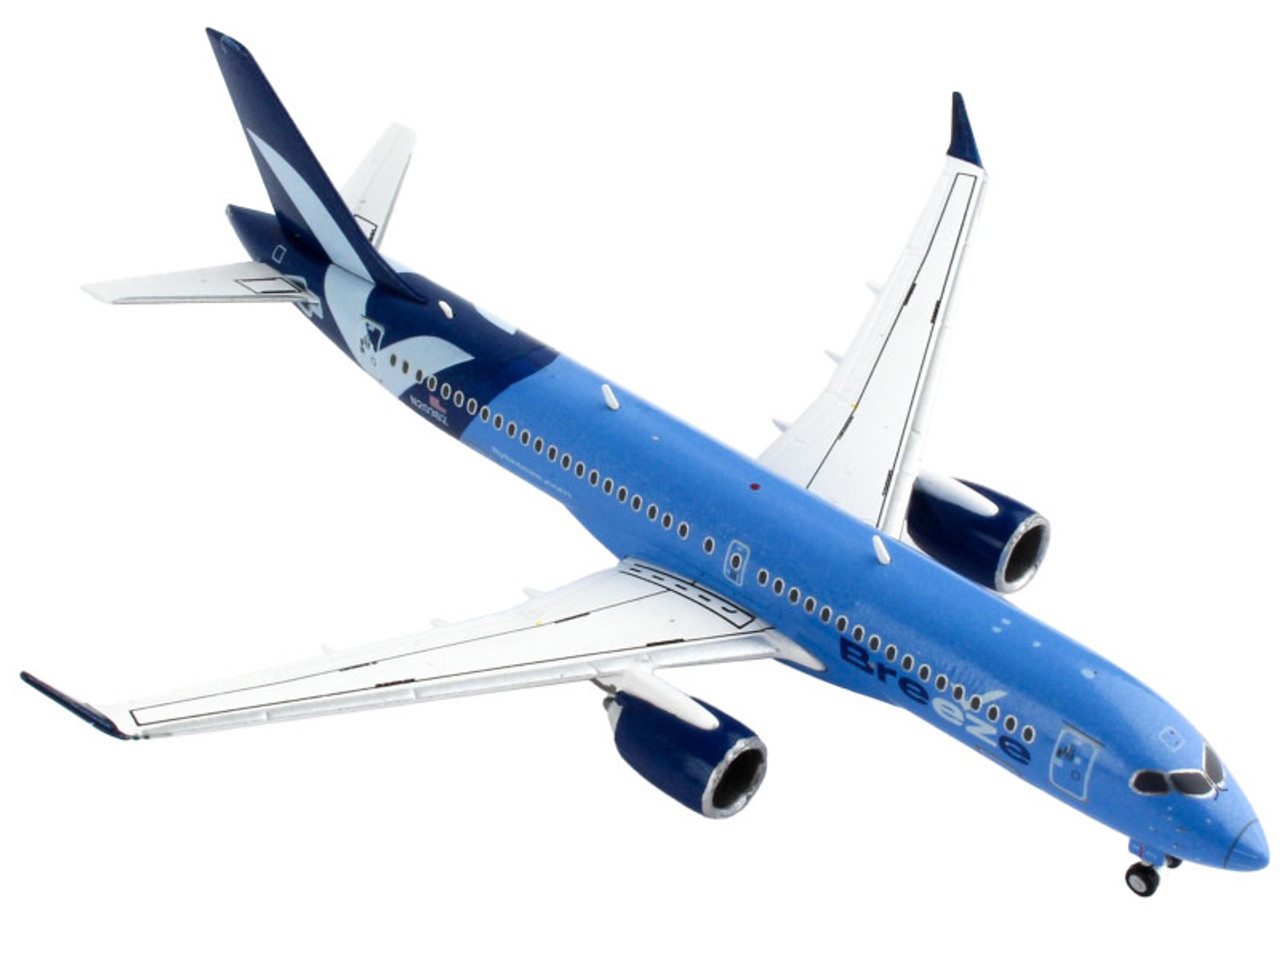 Airbus A220-300 Commercial Aircraft "Breeze Airways" Blue with White Wings 1/400 Diecast Model Airplane by GeminiJets